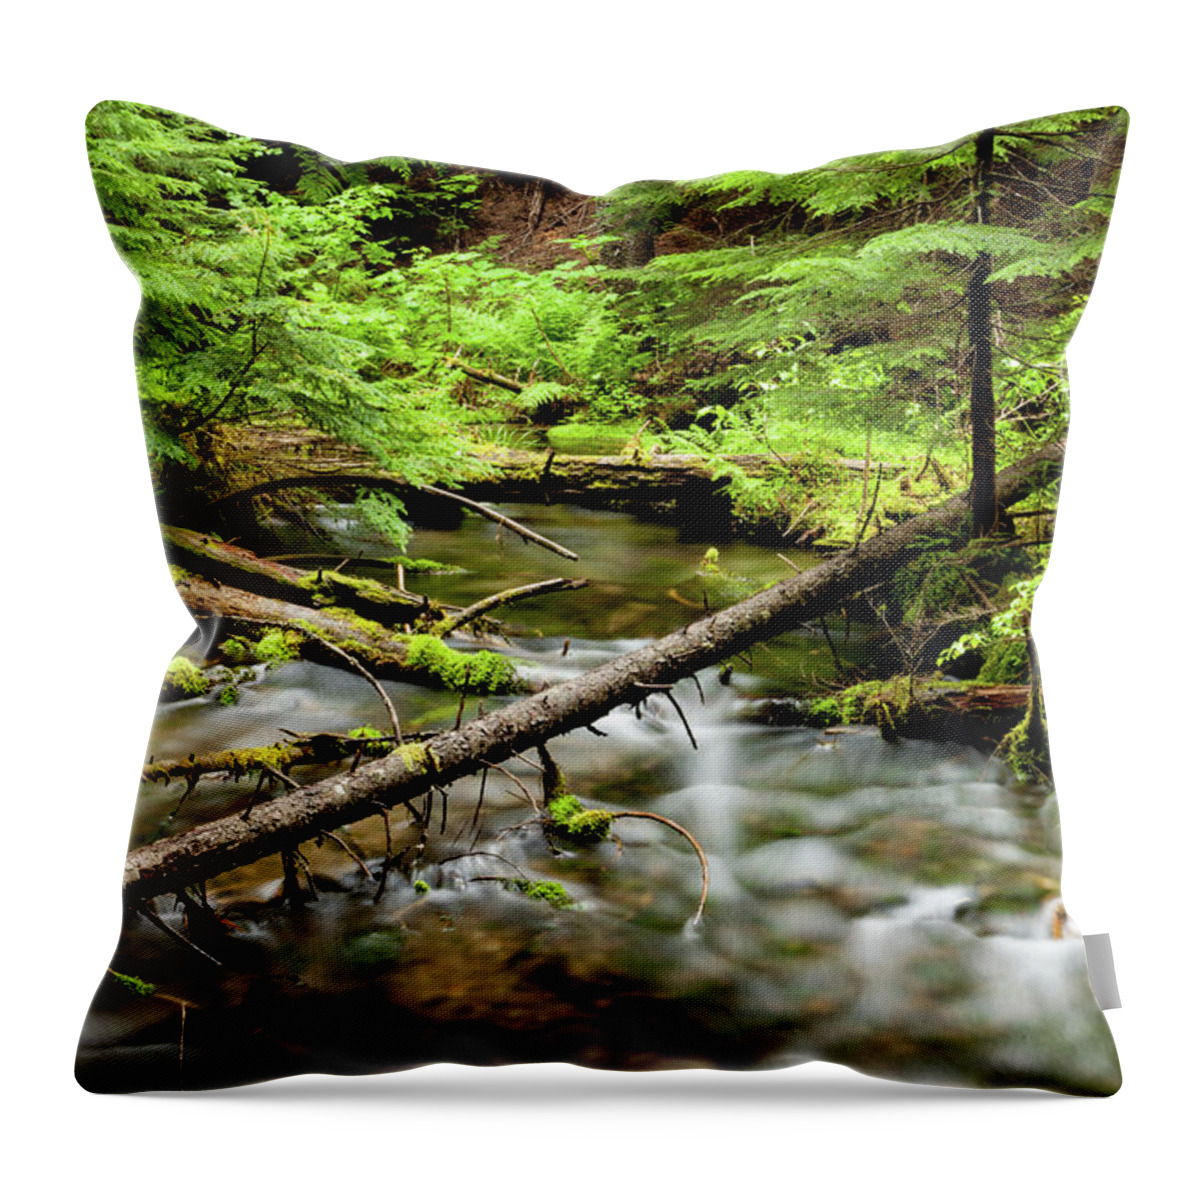 Creek Throw Pillow featuring the photograph Serenity by Fran Riley